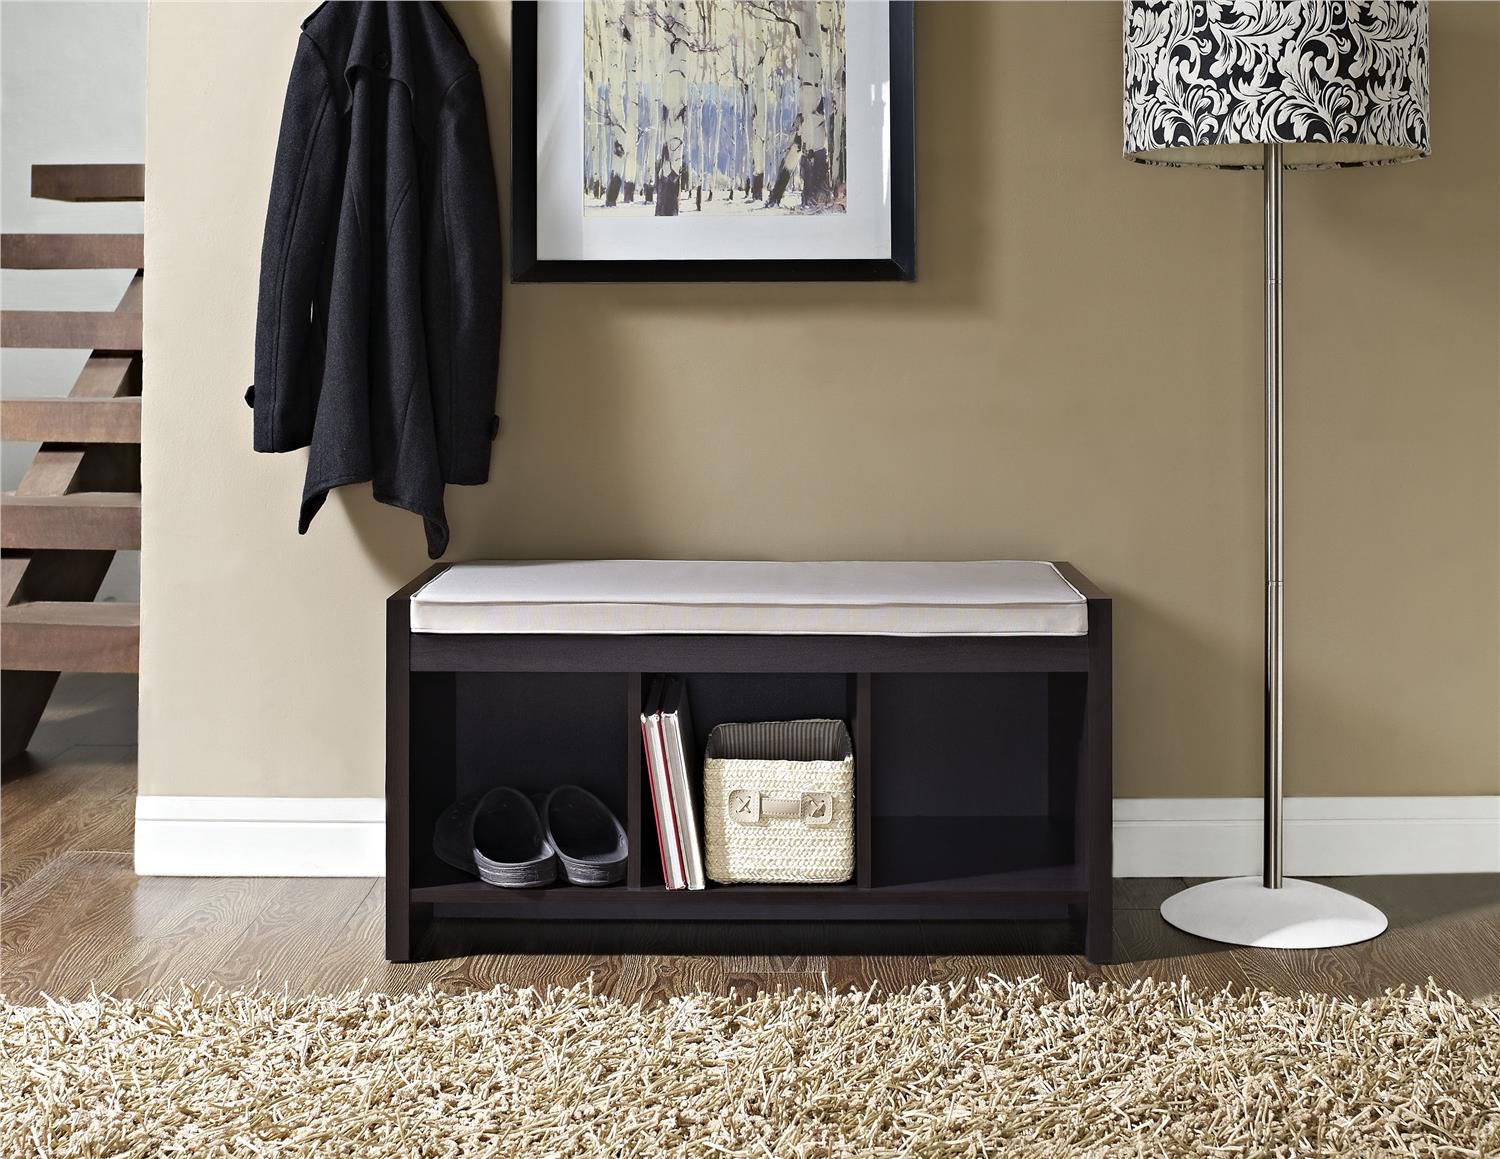 Ameriwood Home Penelope Entryway Storage Bench With Cushion - Espresso